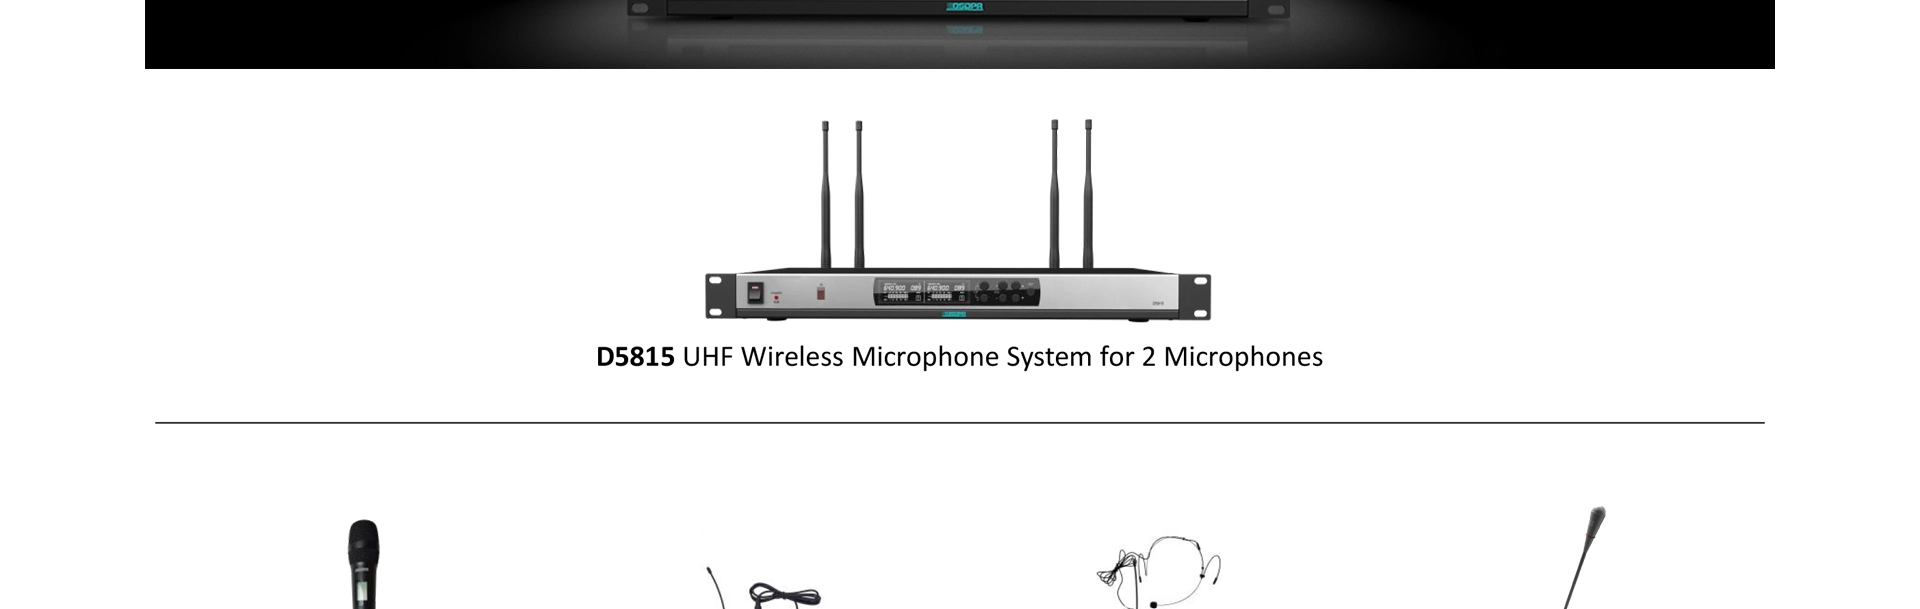 4 Channels Wireless Microphone System Receiver